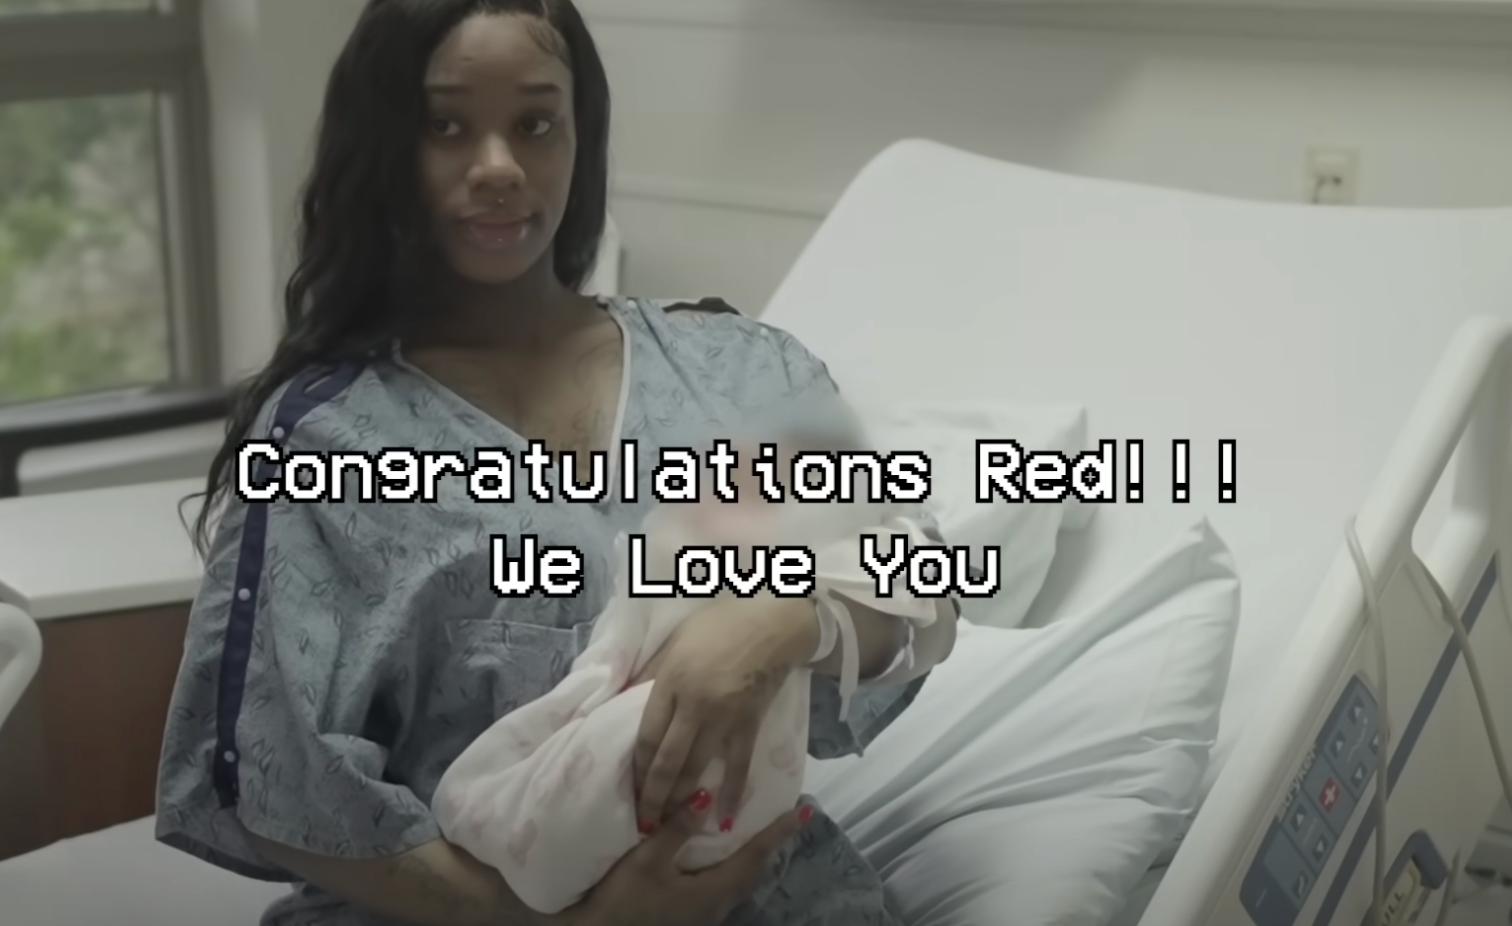 The real footage shows a congratulatory message for Red as she holds her new baby